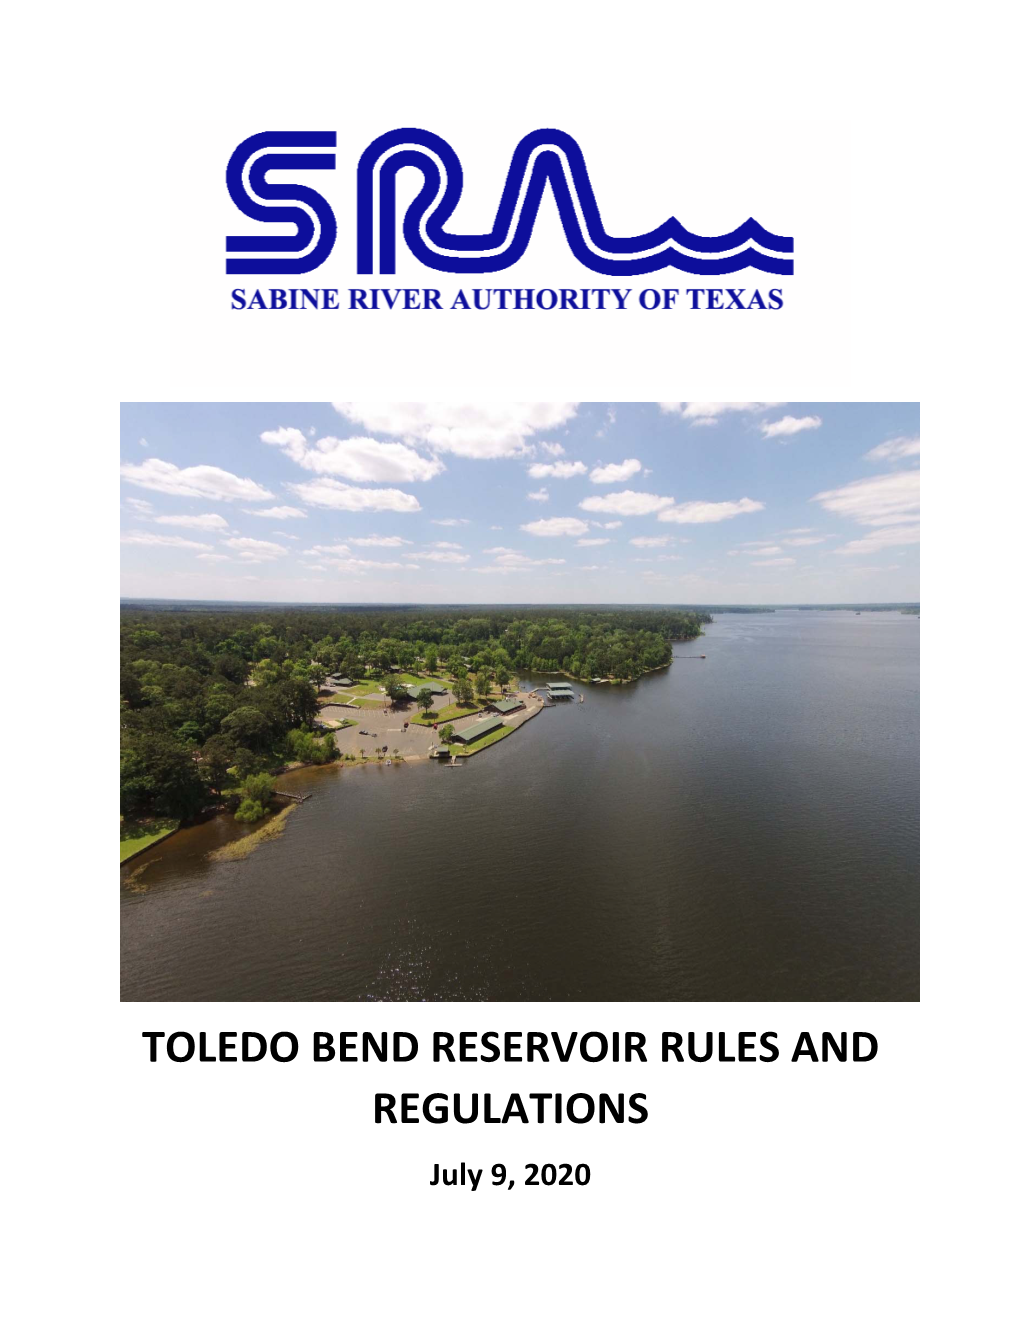 TOLEDO BEND RESERVOIR RULES and REGULATIONS July 9, 2020 CONTENTS INTRODUCTION